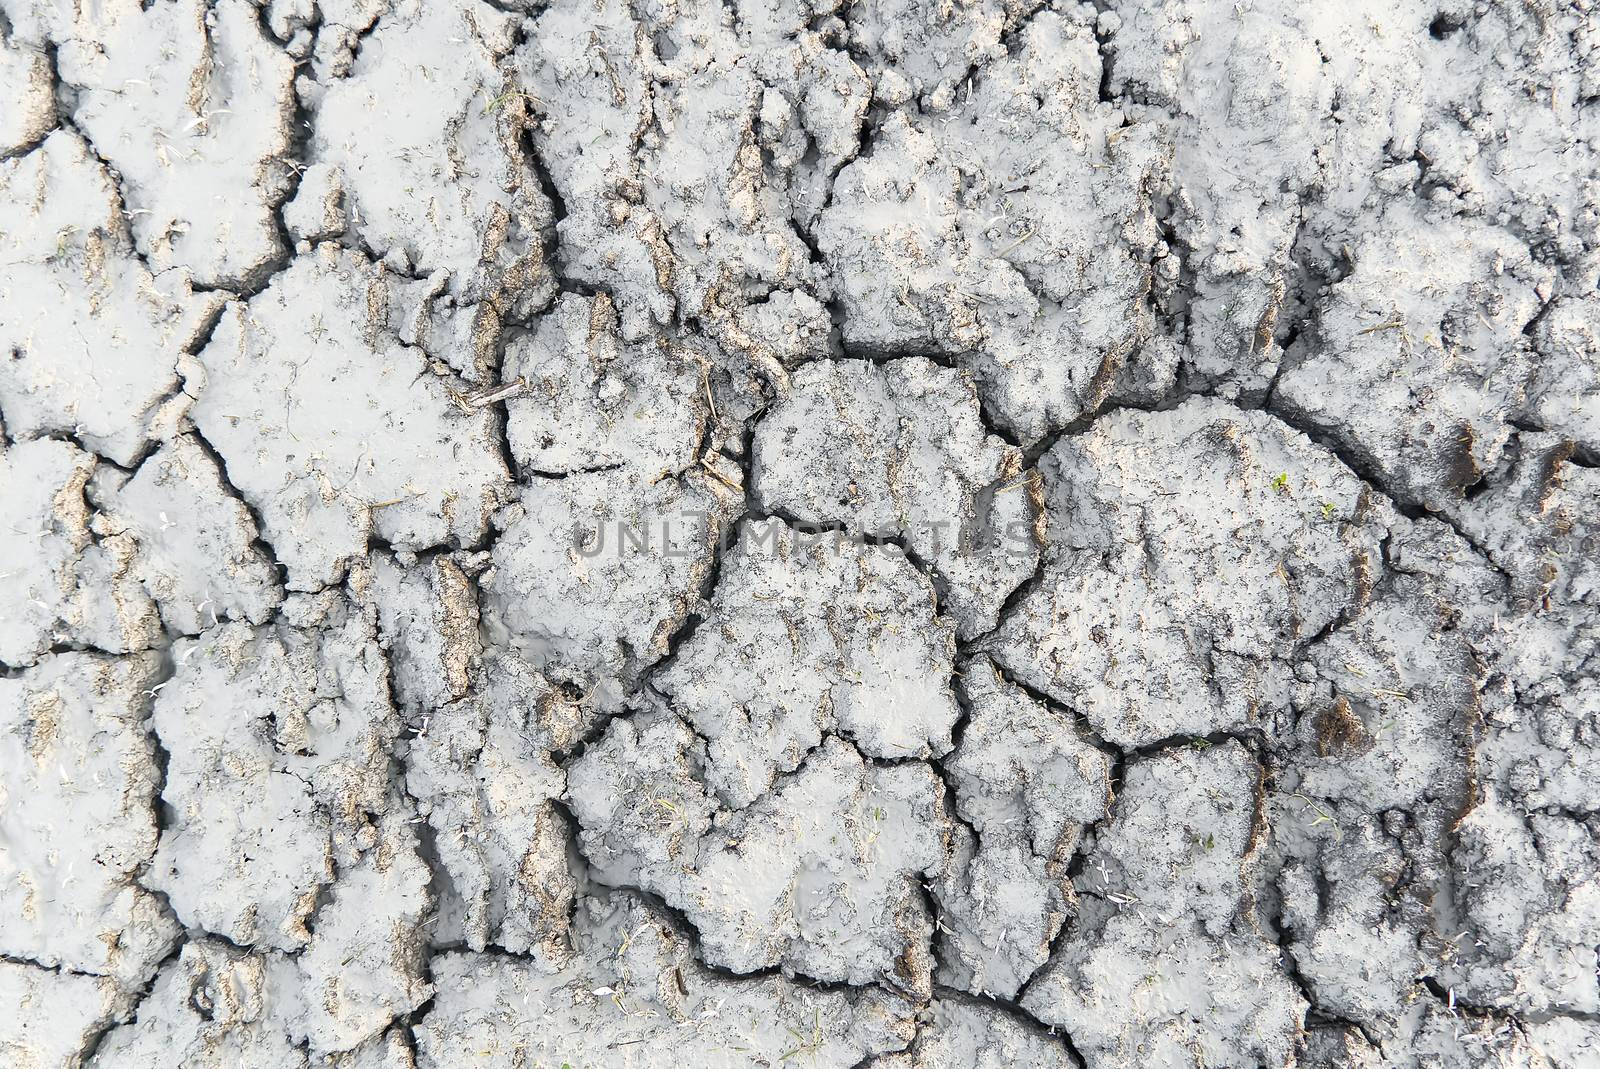 dry cracked earth texture. Dry cracked earth background, cracked earth texture